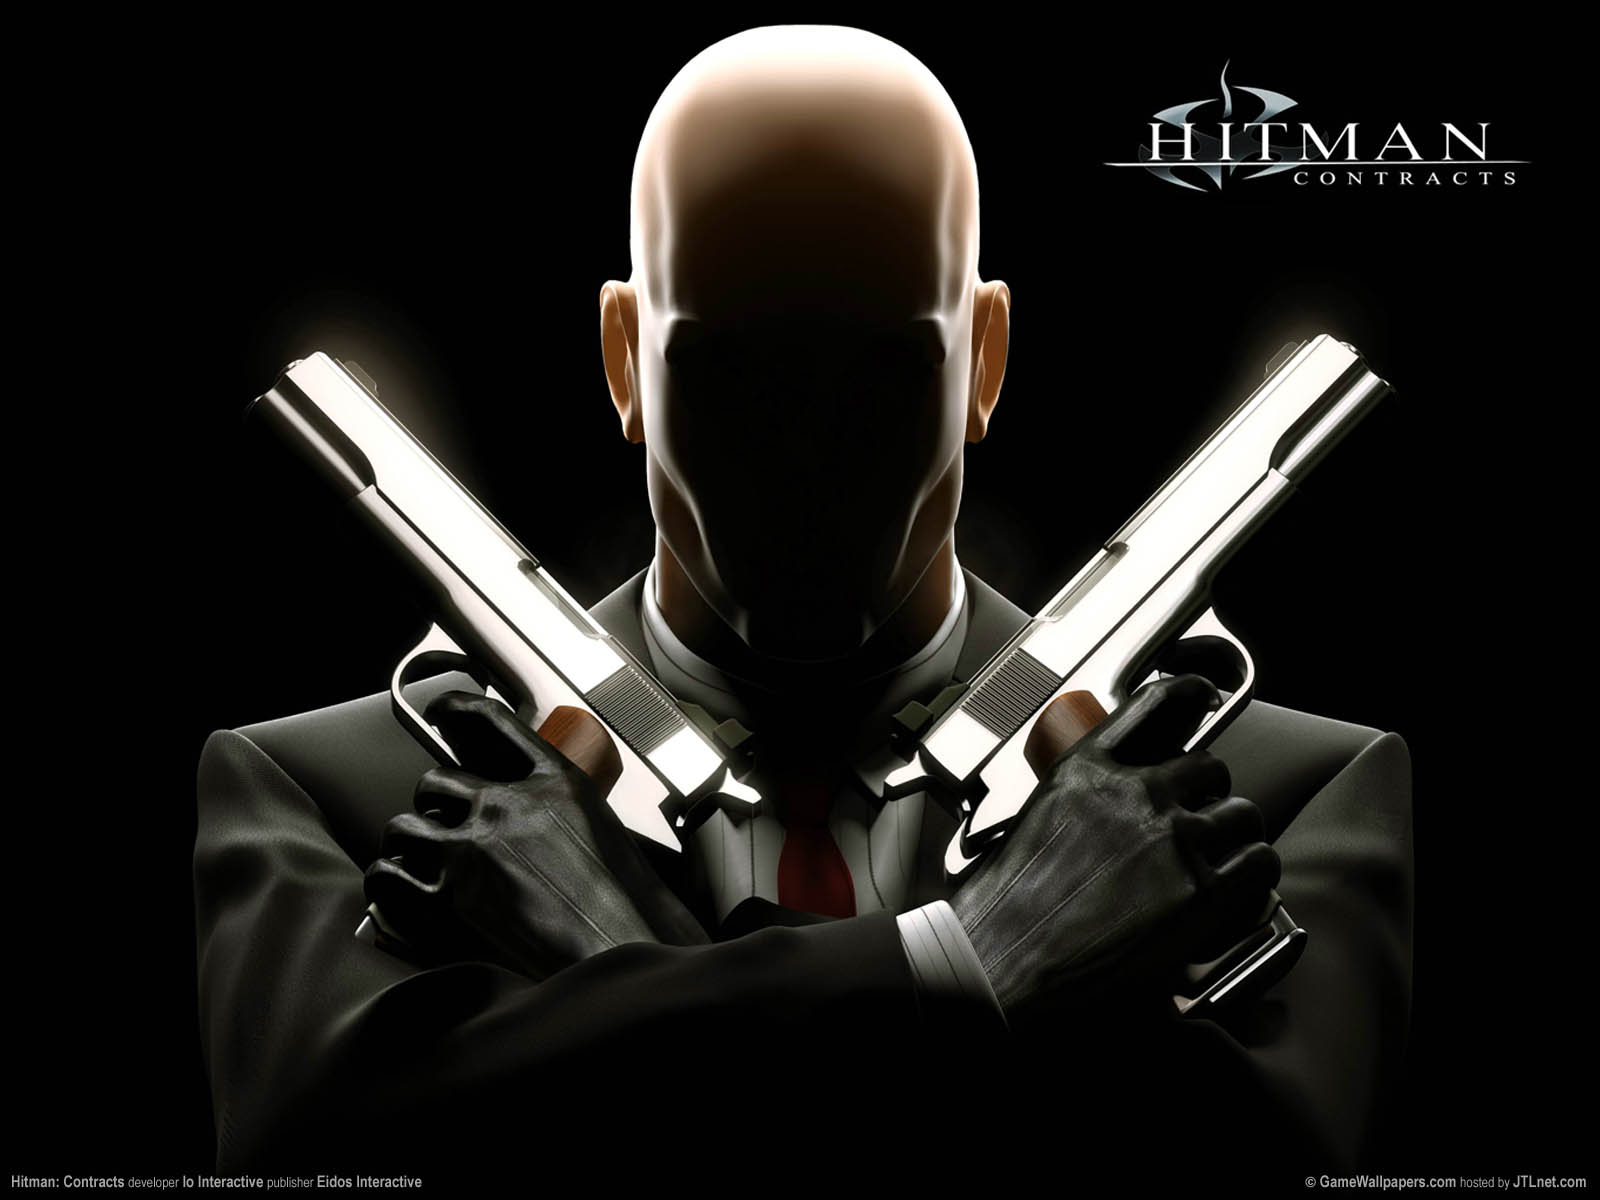 Hitman%3A Contracts achtergrond 01 1600x1200